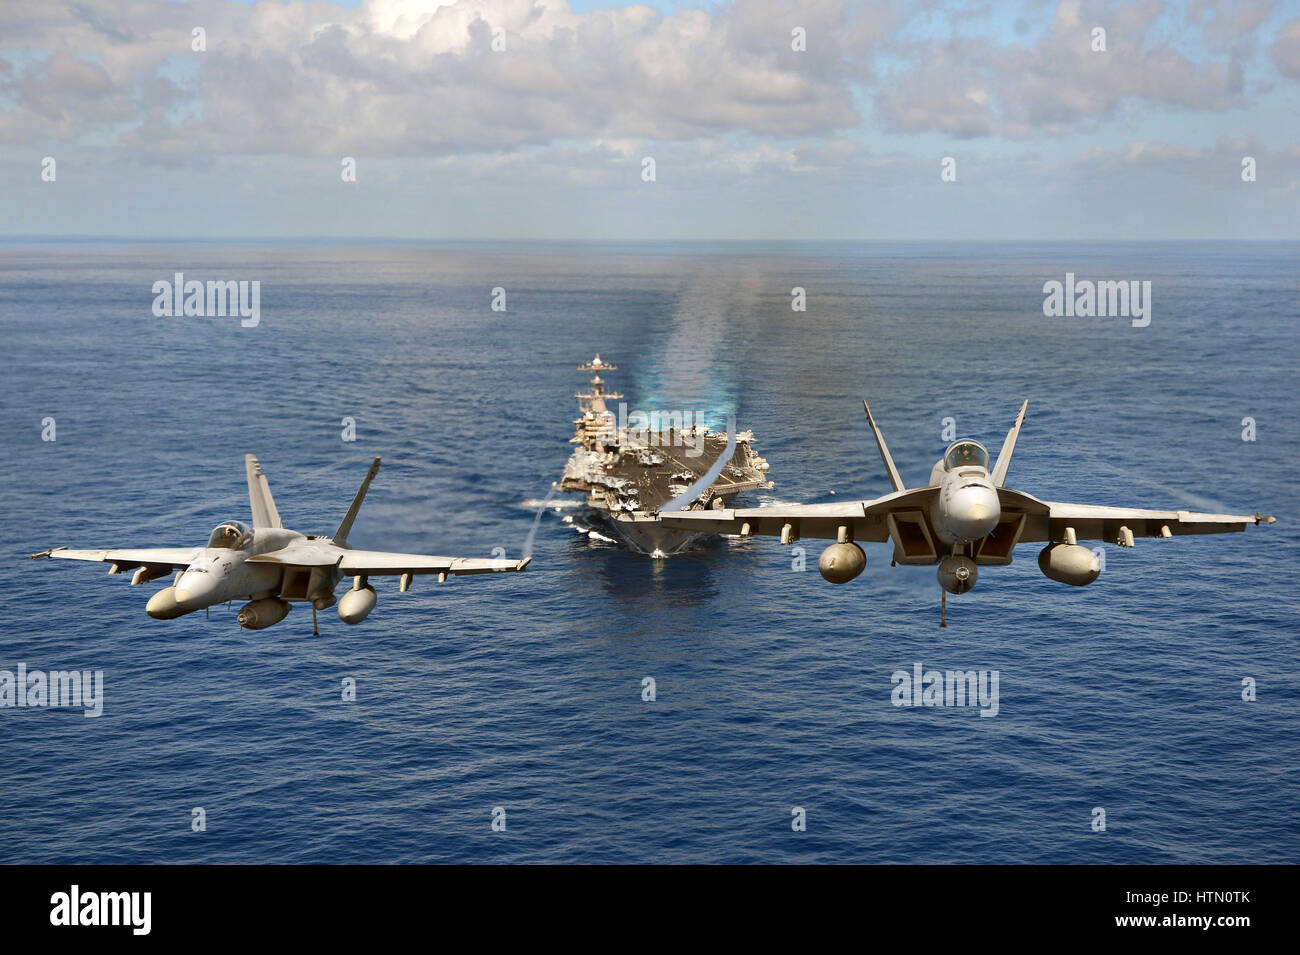 U.S. Navy F/A-18 Super Hornet fighter aircraft fly in formation in front of the USN Nimitz-class aircraft carrier USS John C. Stennis April 24, 2013 in the Pacific Ocean. Stock Photo